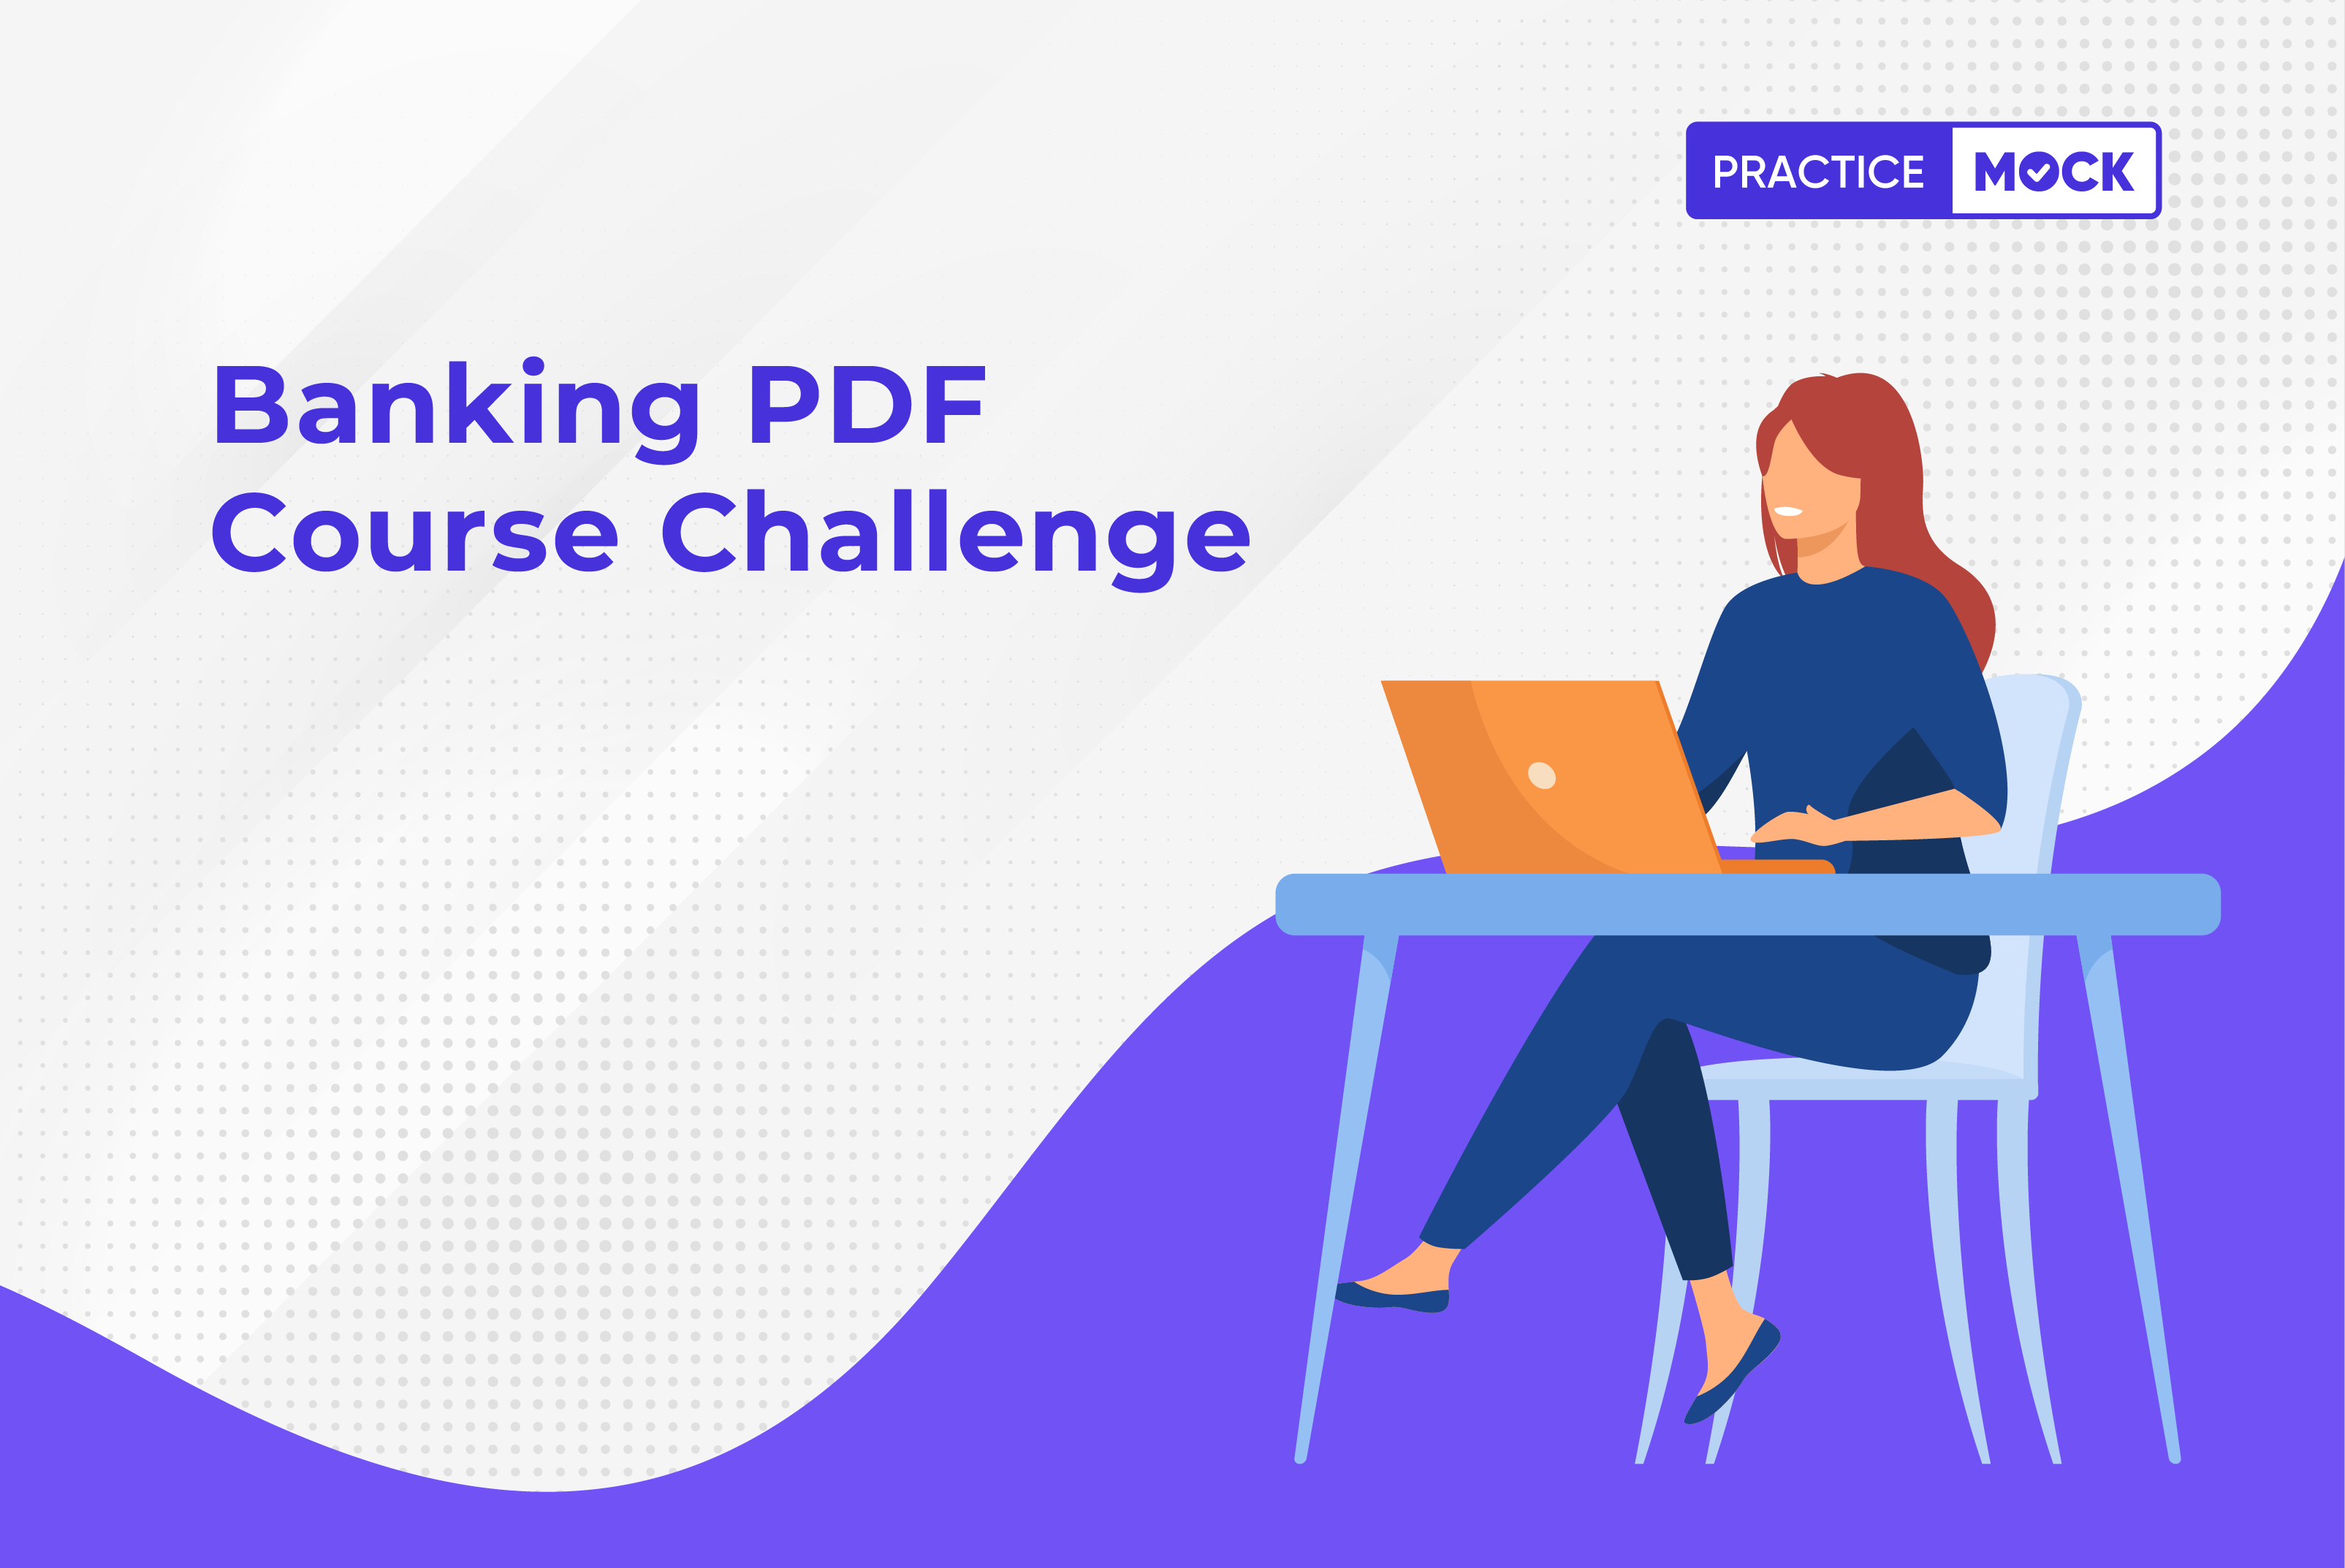 Banking PDF Course Challenge